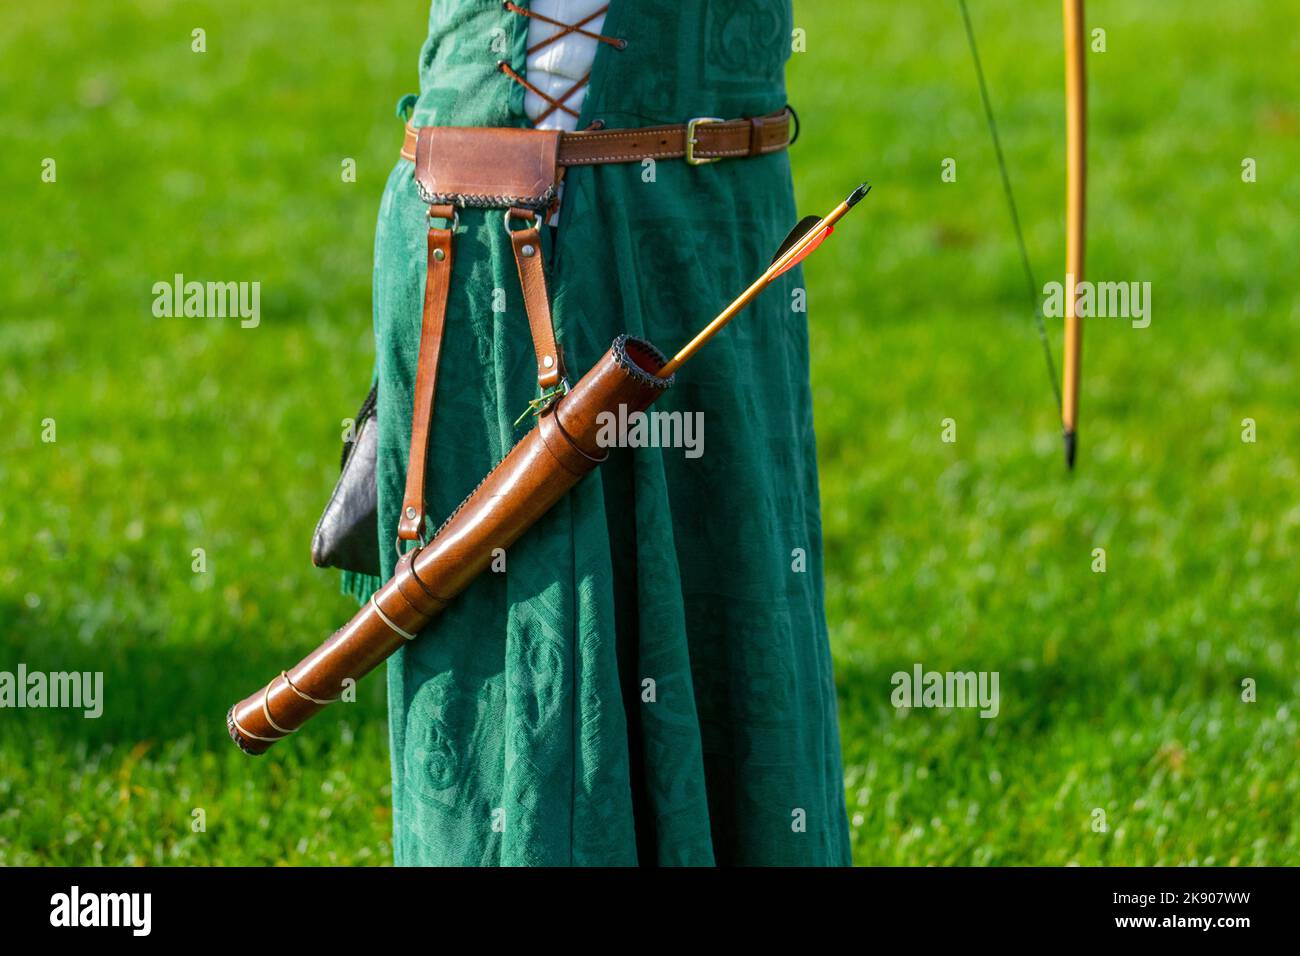 SAMLESBURY LONGBOW ARCHERS THE BATTLE OF AGINCOURT - 1415 reenactment. Traditional long bow archery shoot on the battle anniversary in medieval dress, British Long-Bow Society (BLBS) event Stock Photo